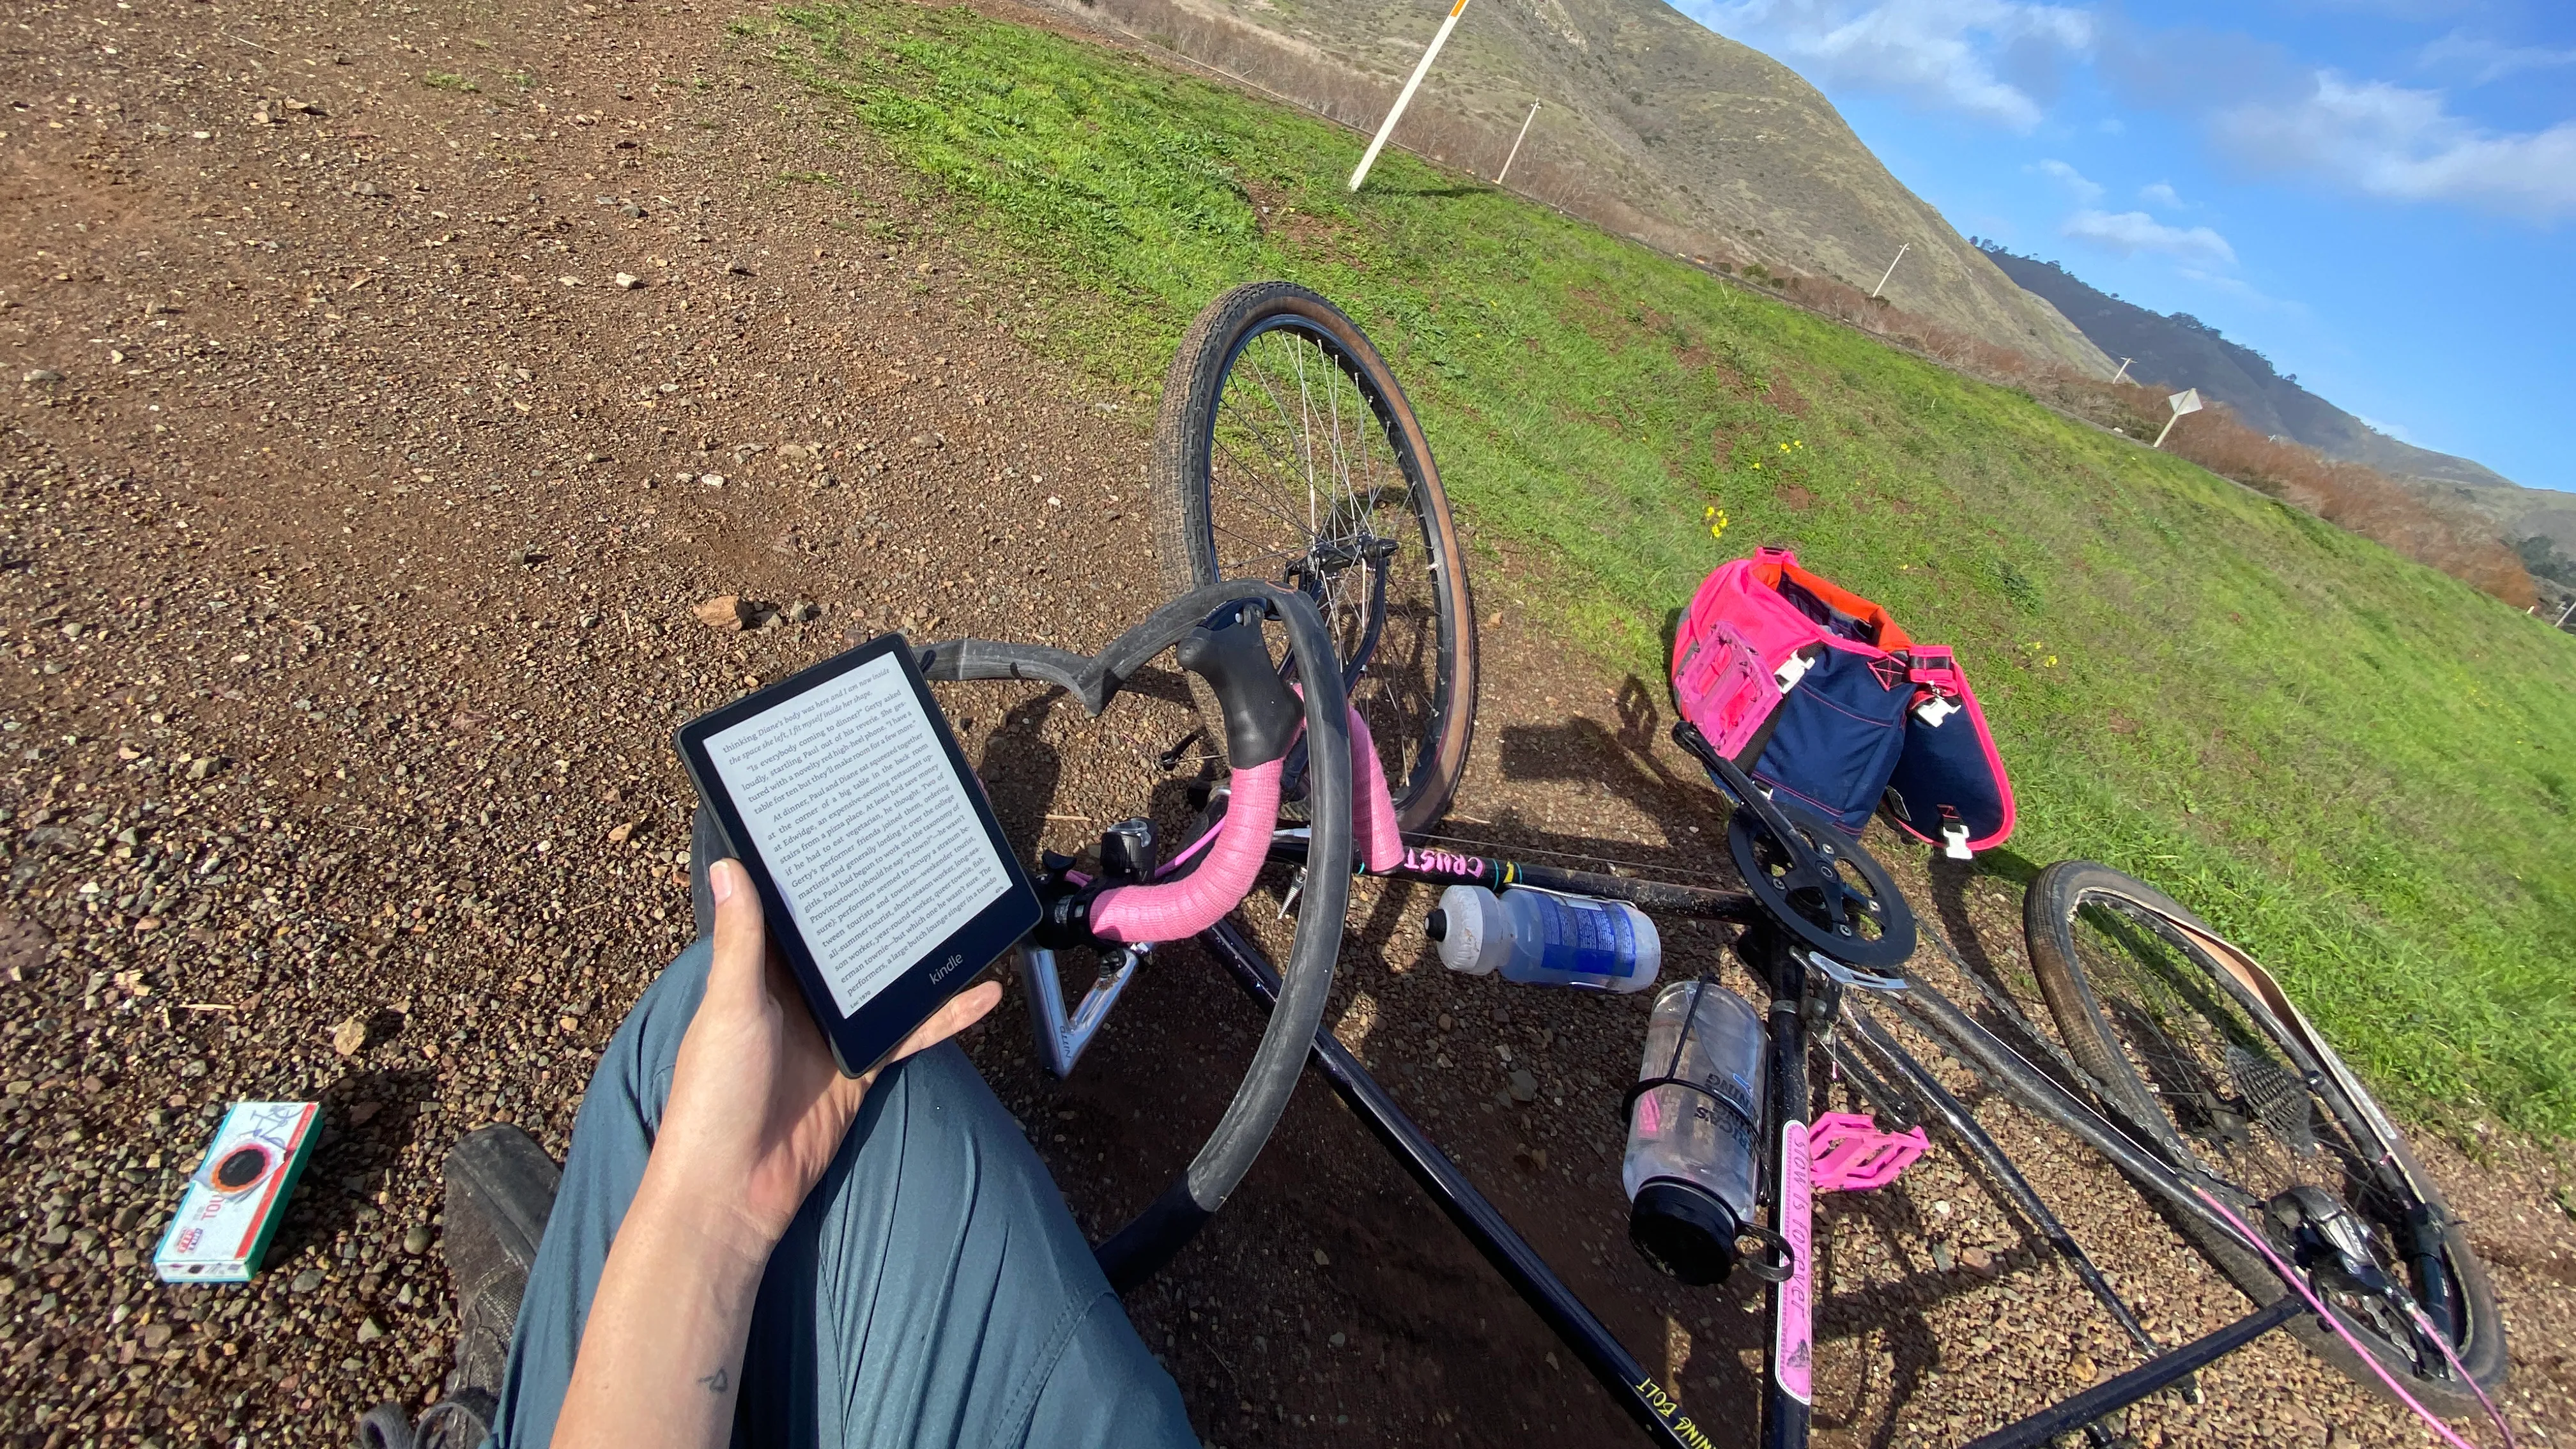 Reading on the ground while patching a flat on my bike tire